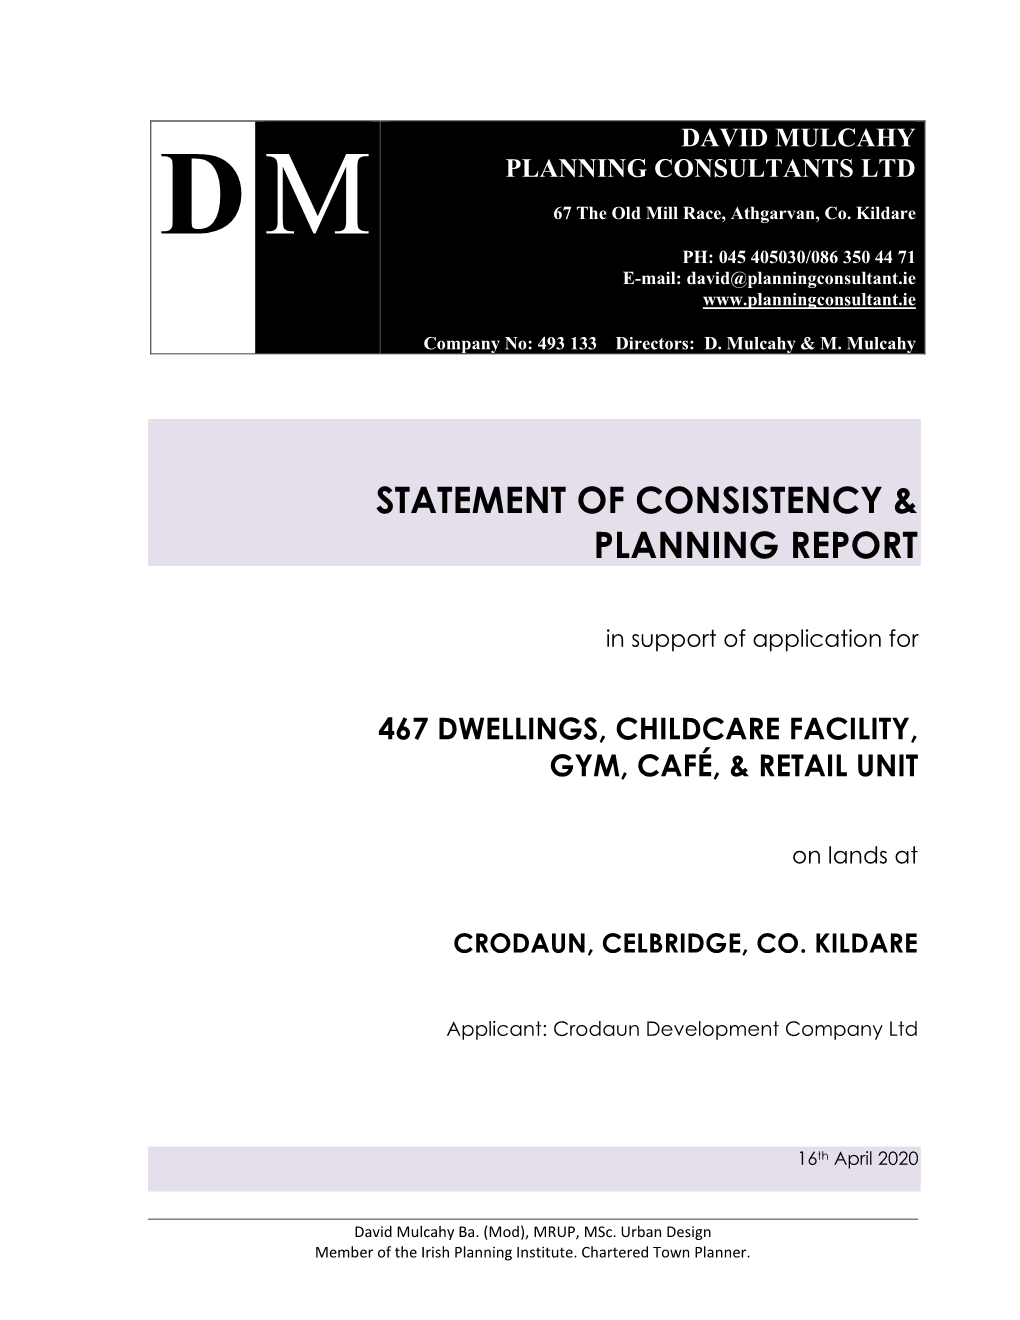 Statement of Consistency & Planning Report